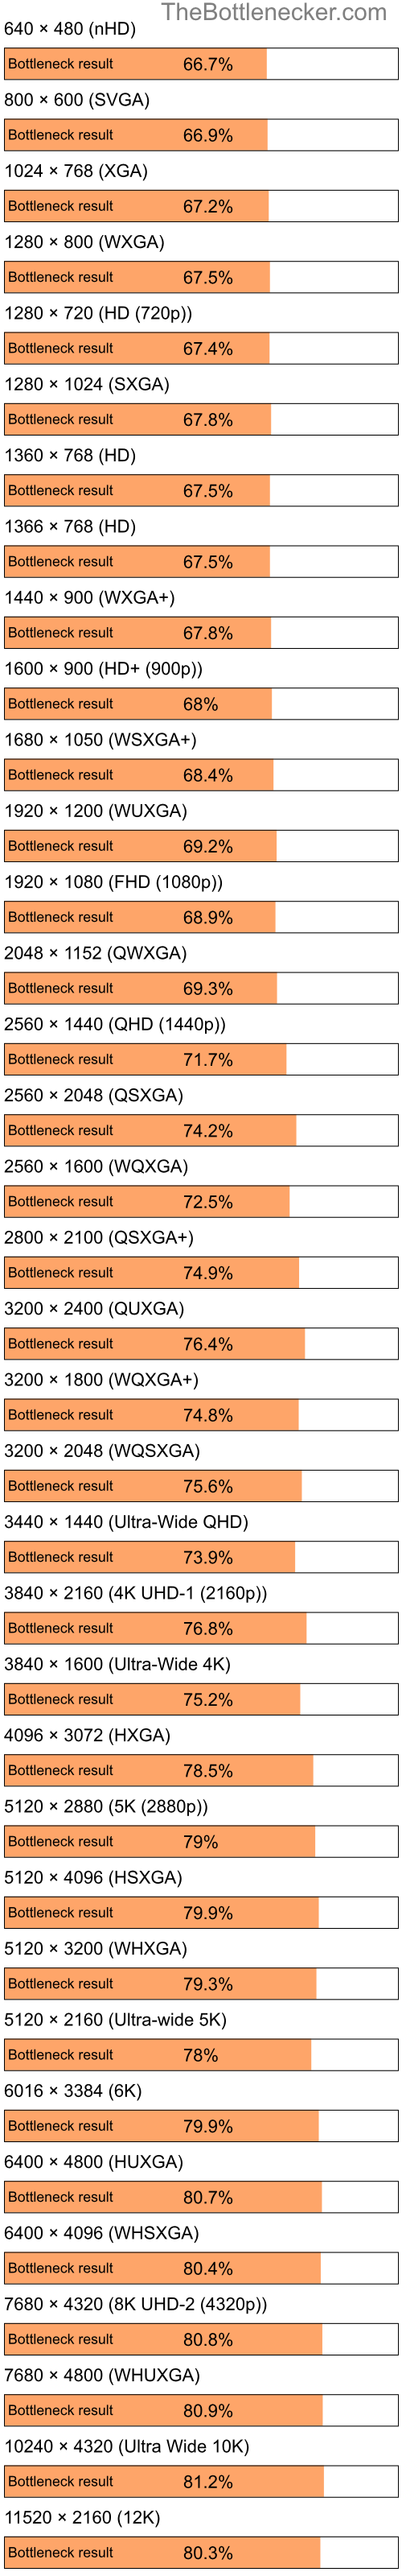 Bottleneck results by resolution for Intel Celeron and AMD Mobility Radeon X1700 in Graphic Card Intense Tasks